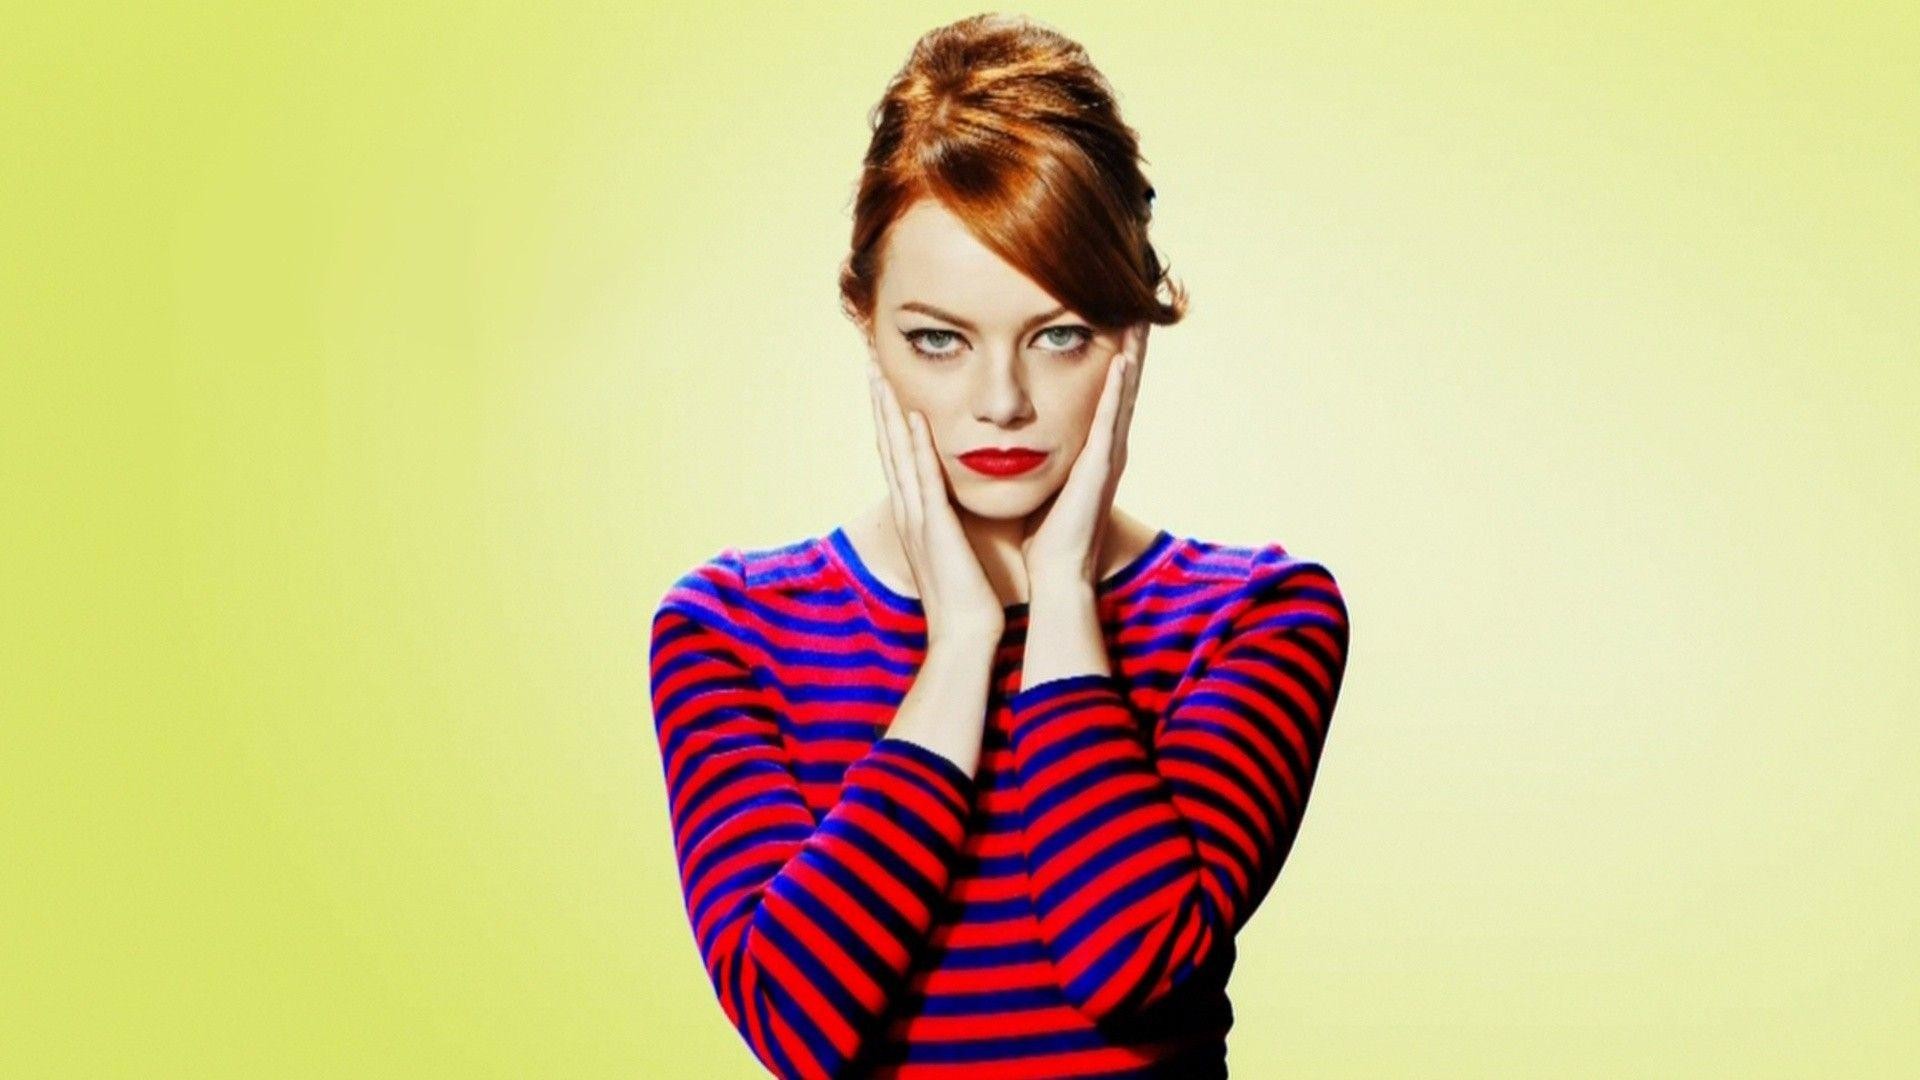 1920x1080 Emma Stone Hd Wallpapers | Wallpapers Top 10